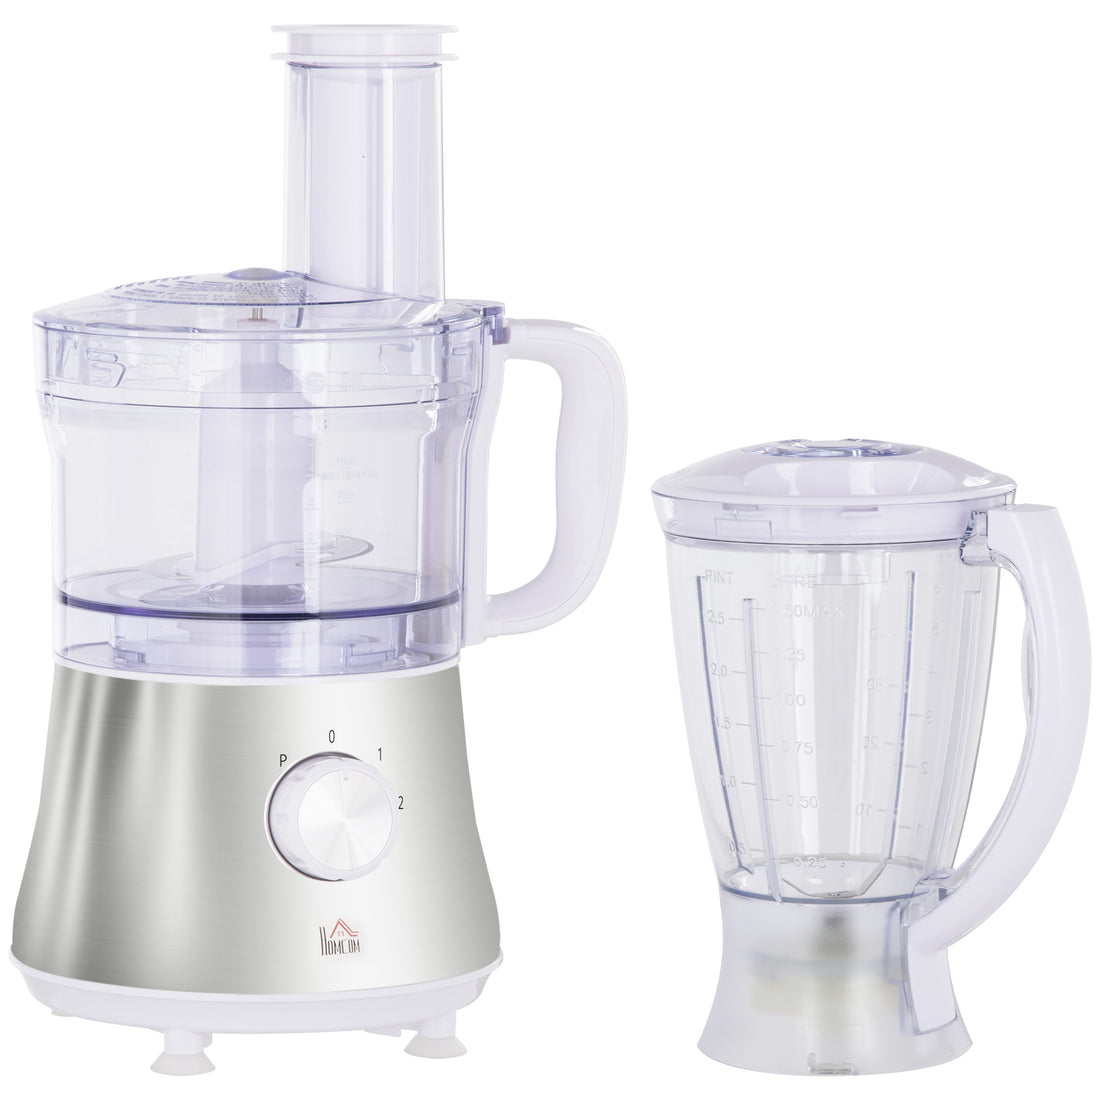 2 in 1 Blender and Food Processor Combo for